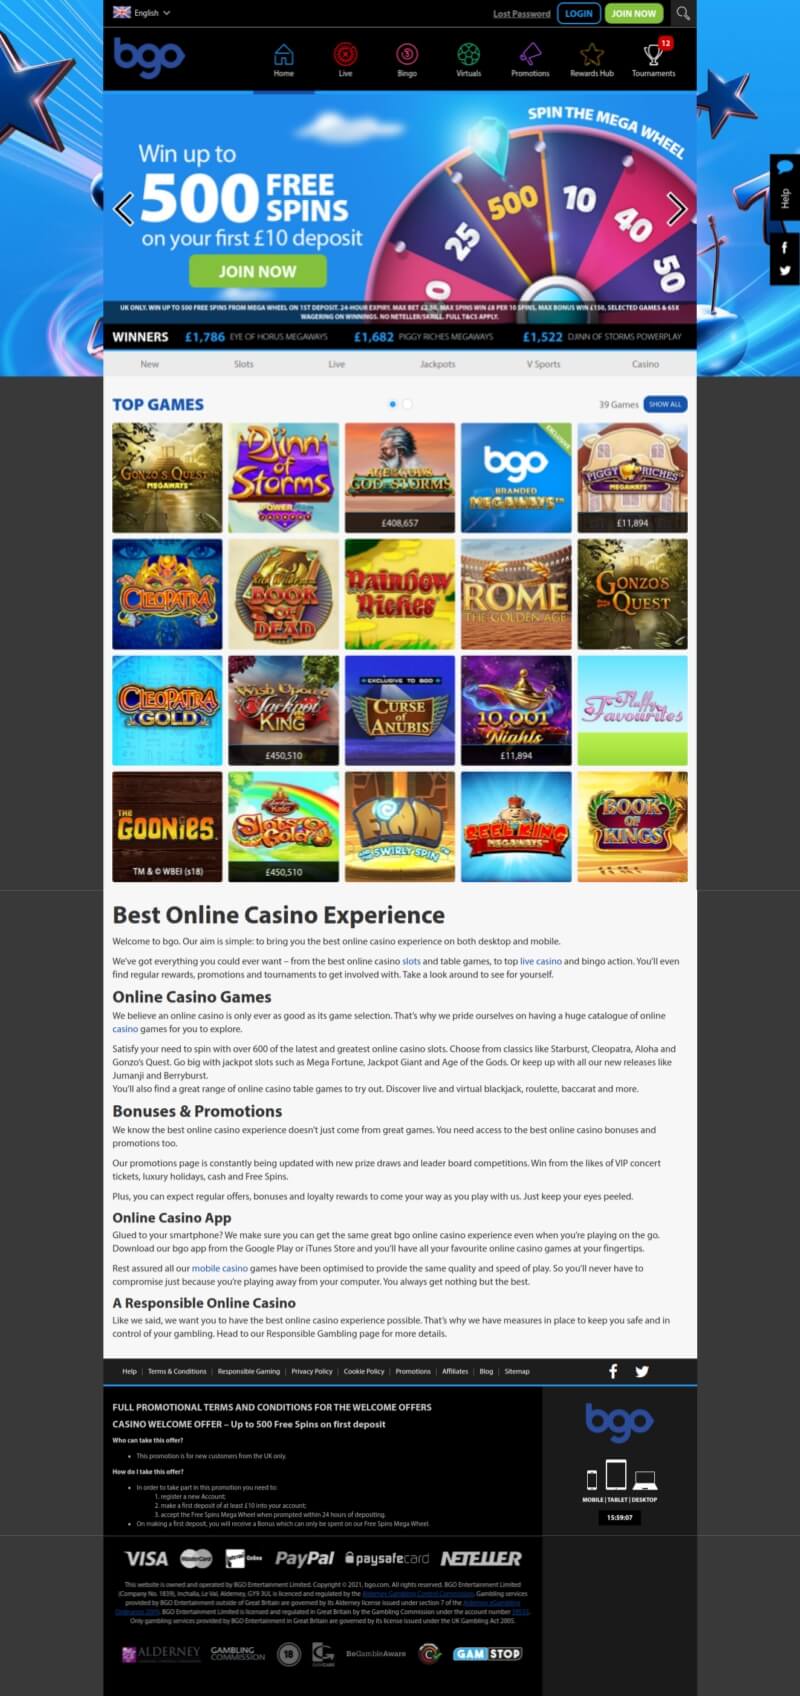 Bgo Casino Full Review and Opinions